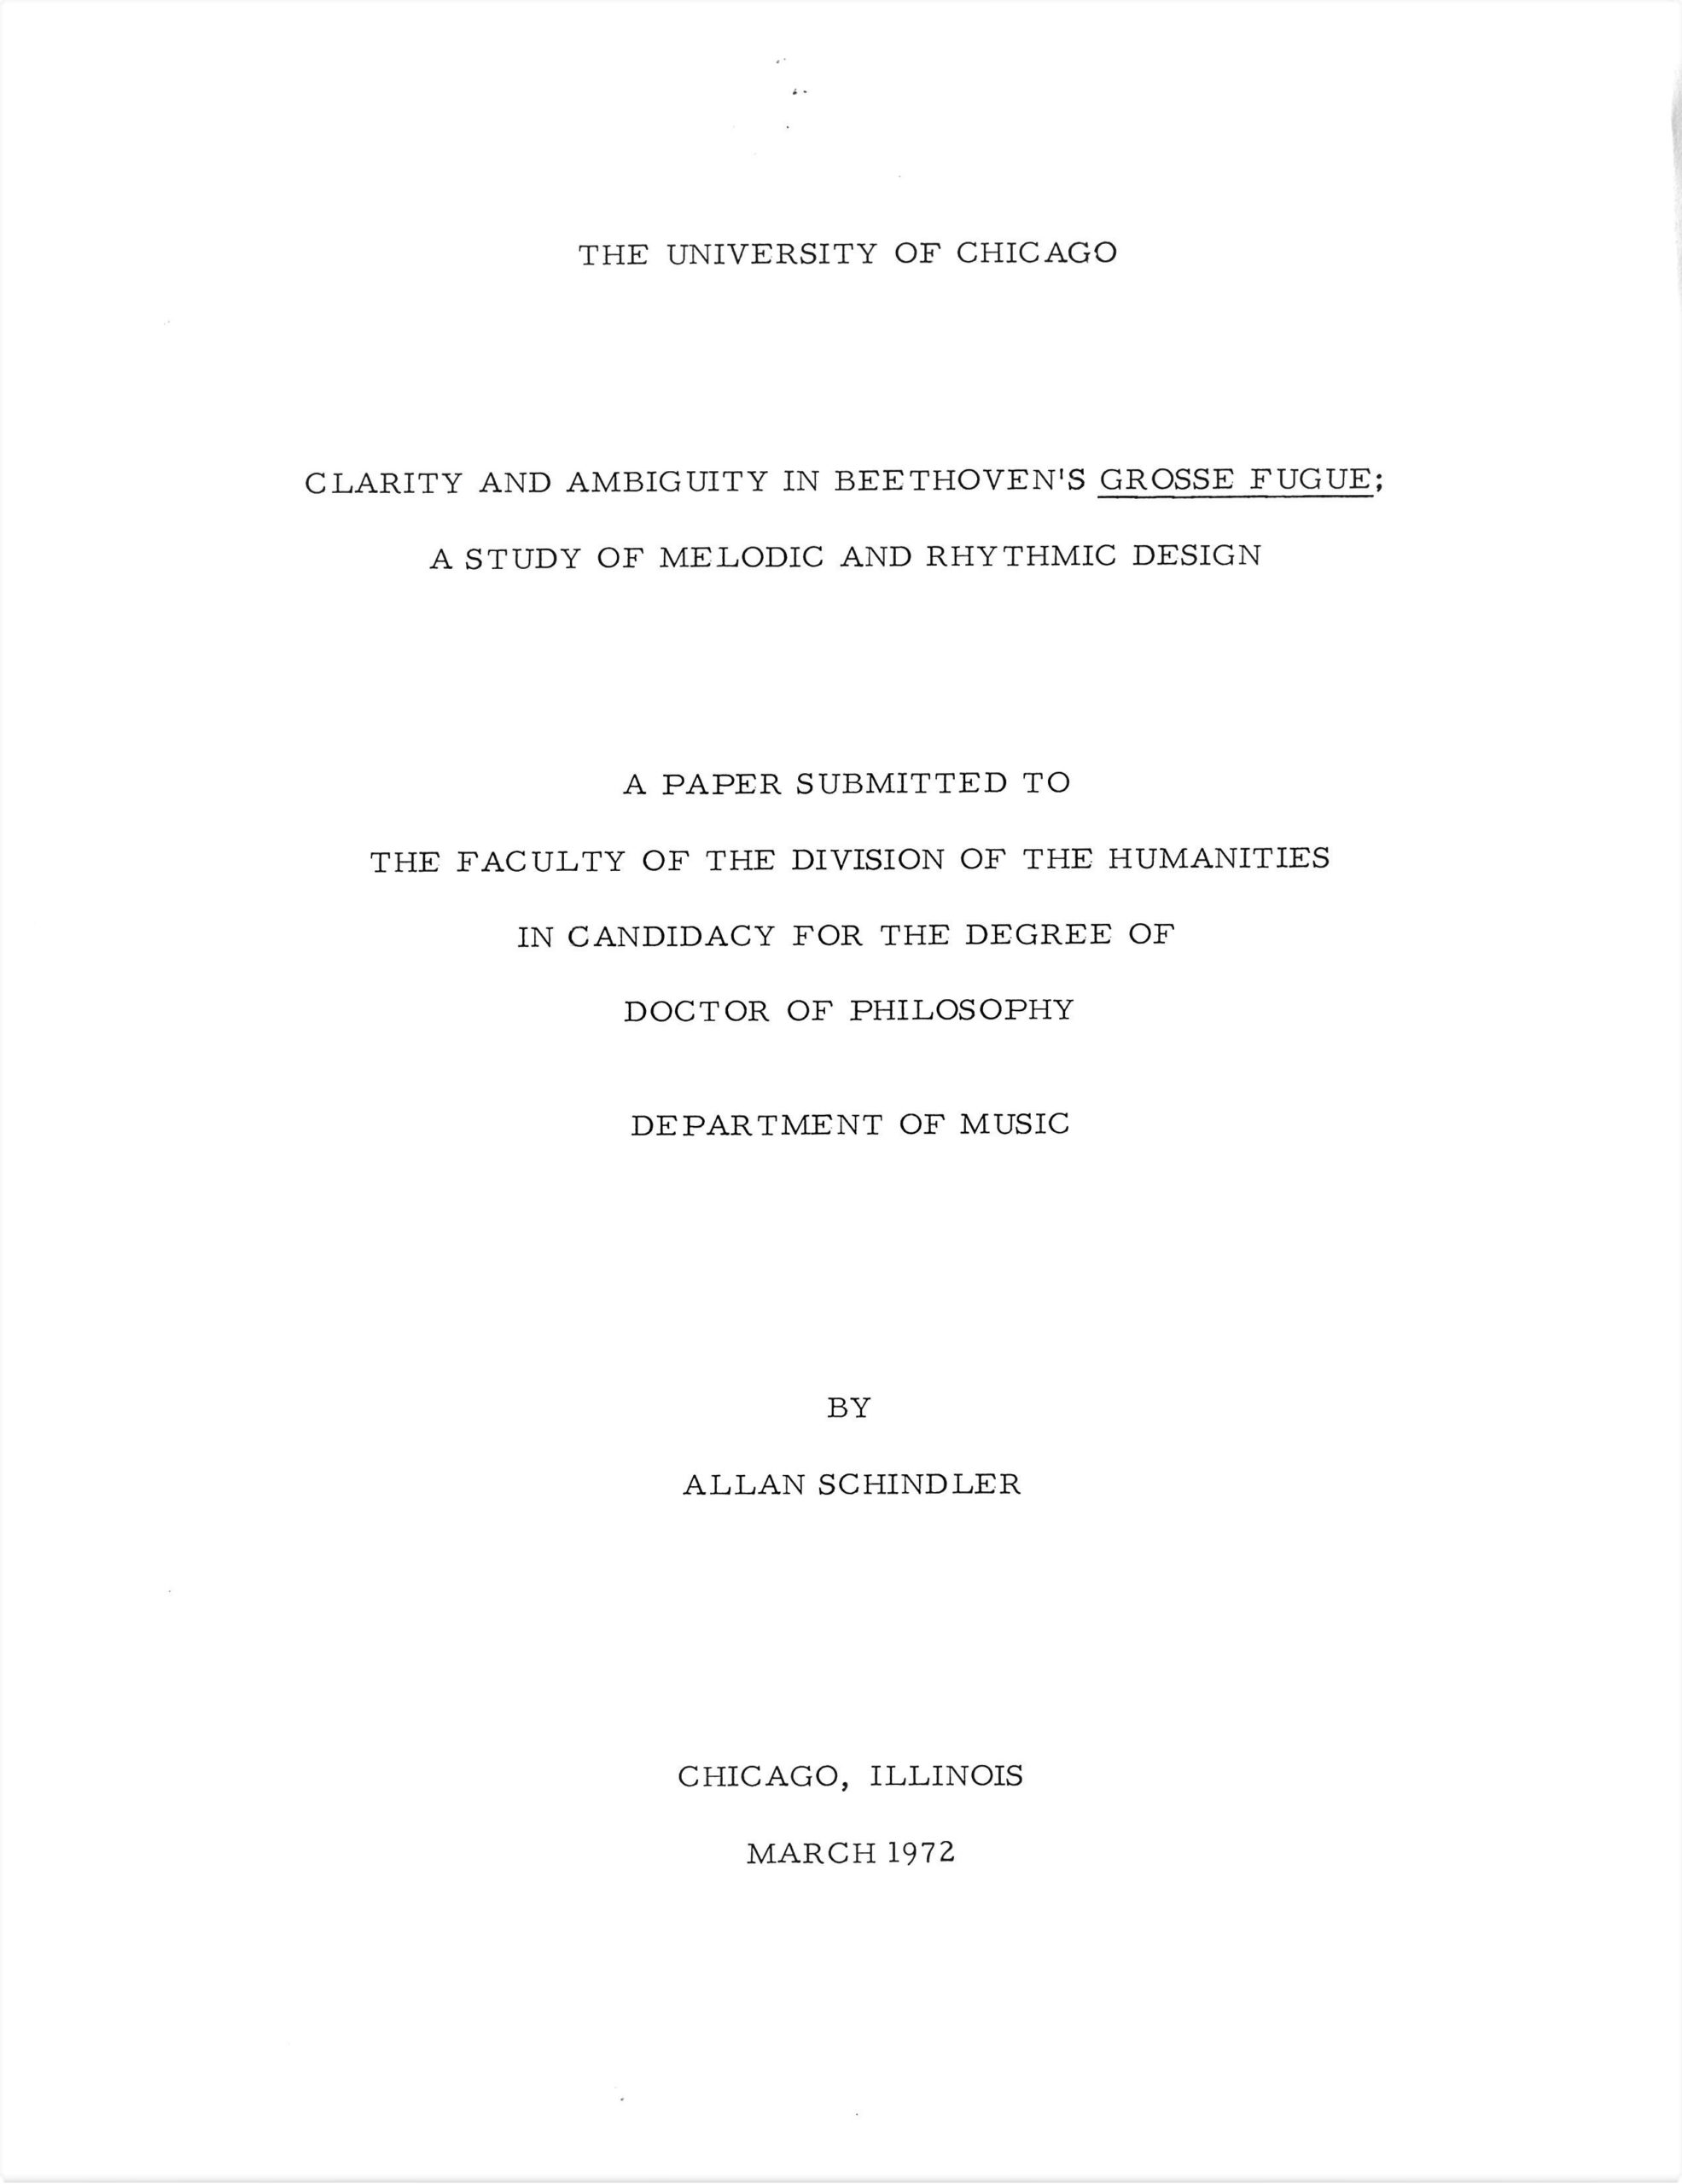 PhD paper (March 1972), title page